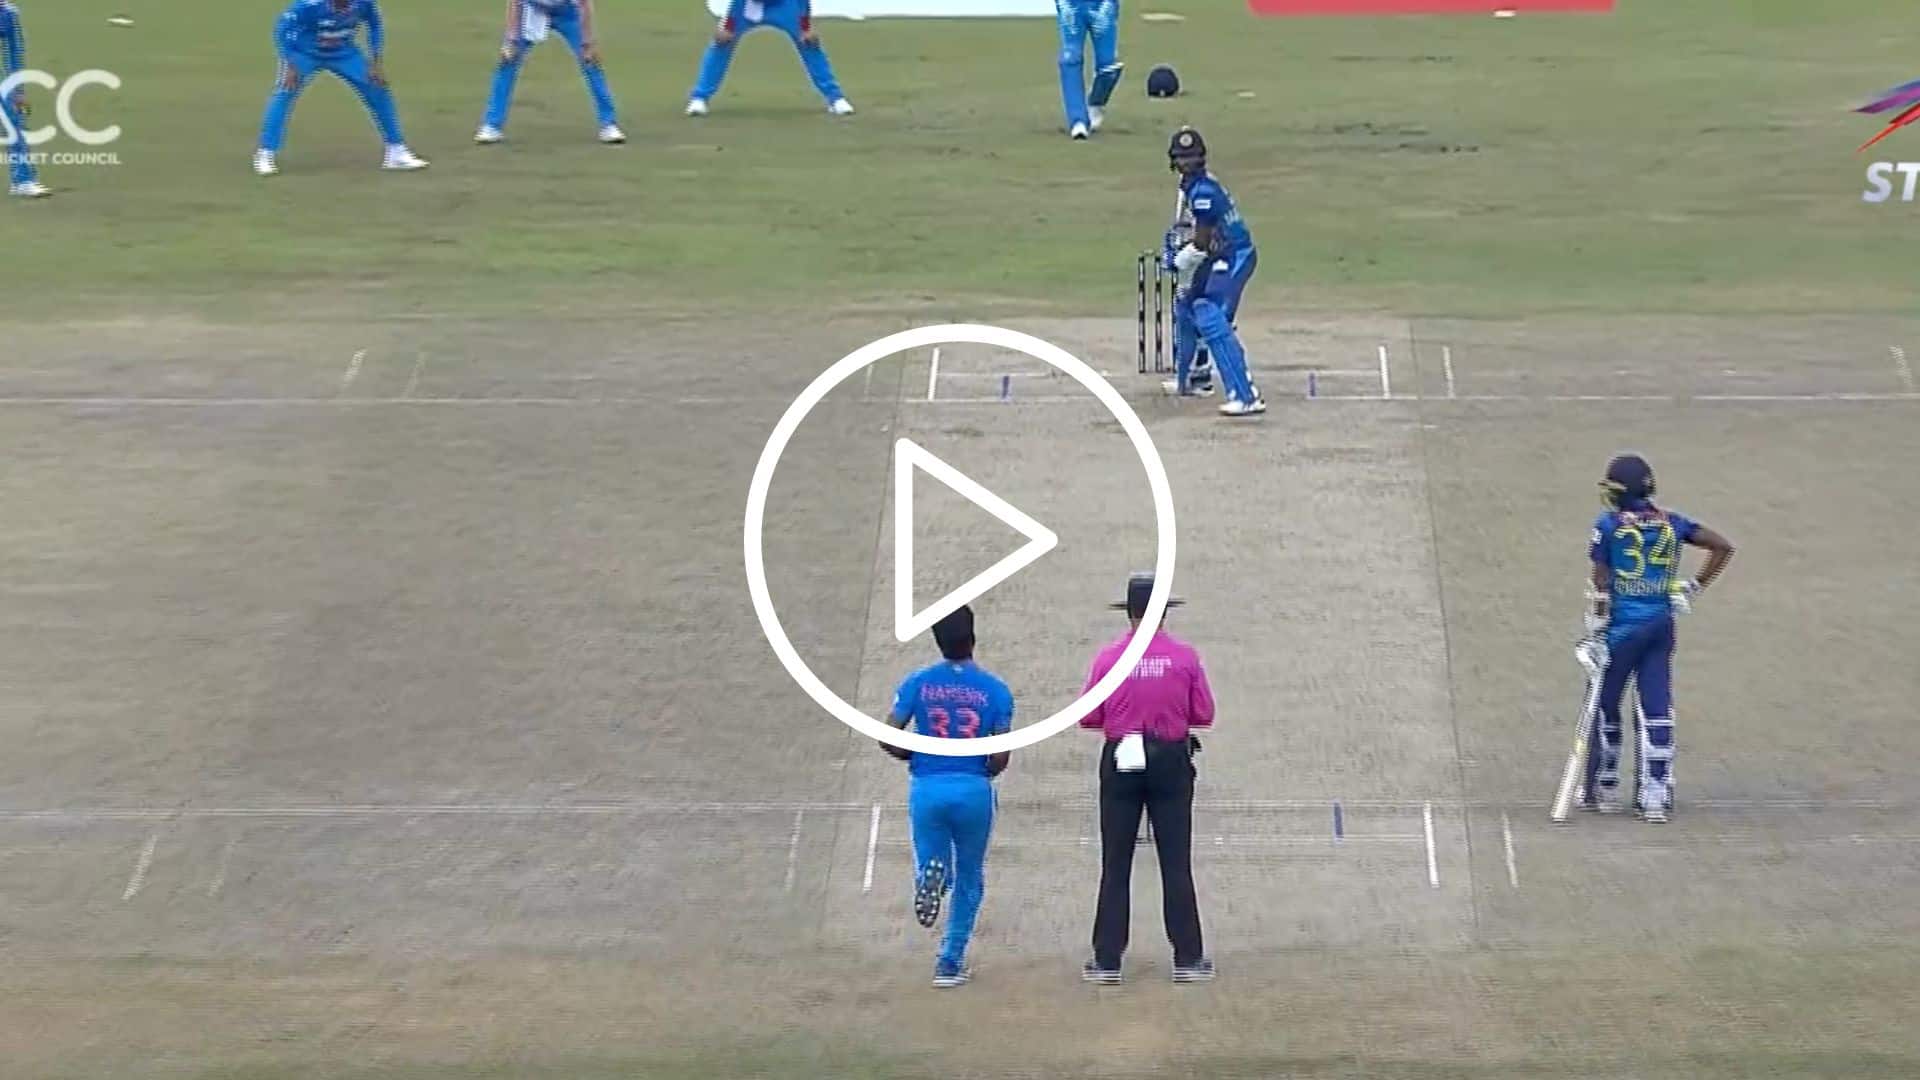 [Watch] Hardik Pandya Cleans Up Sri Lanka For 50 With Final Two Wickets